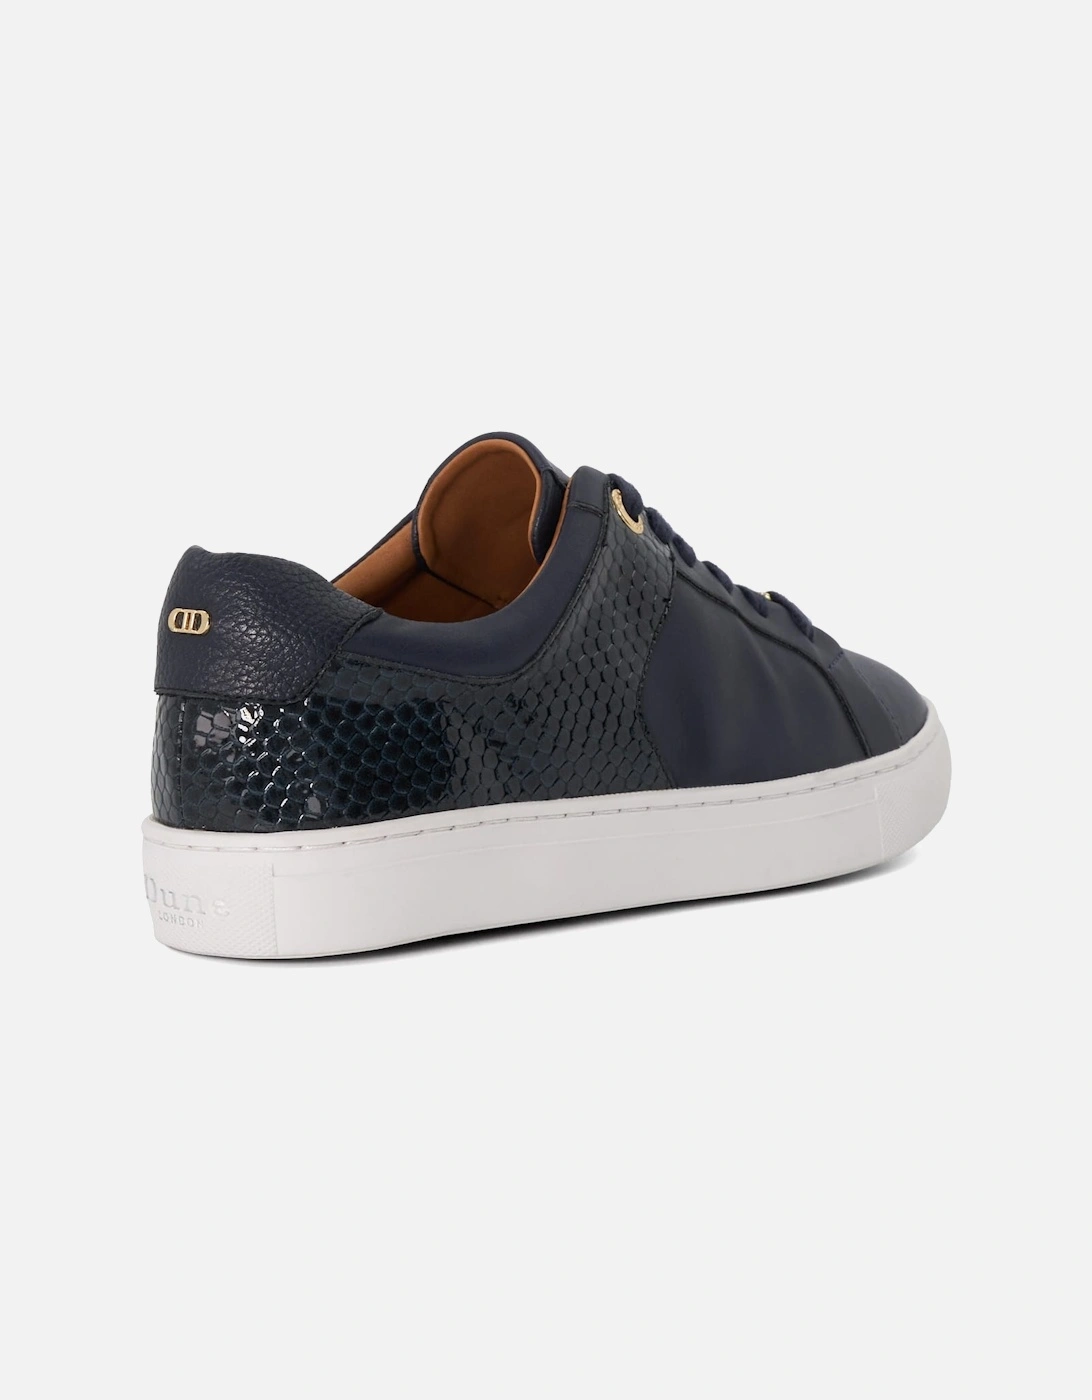 Ladies Elodiie - Branded Lace-Up Trainers